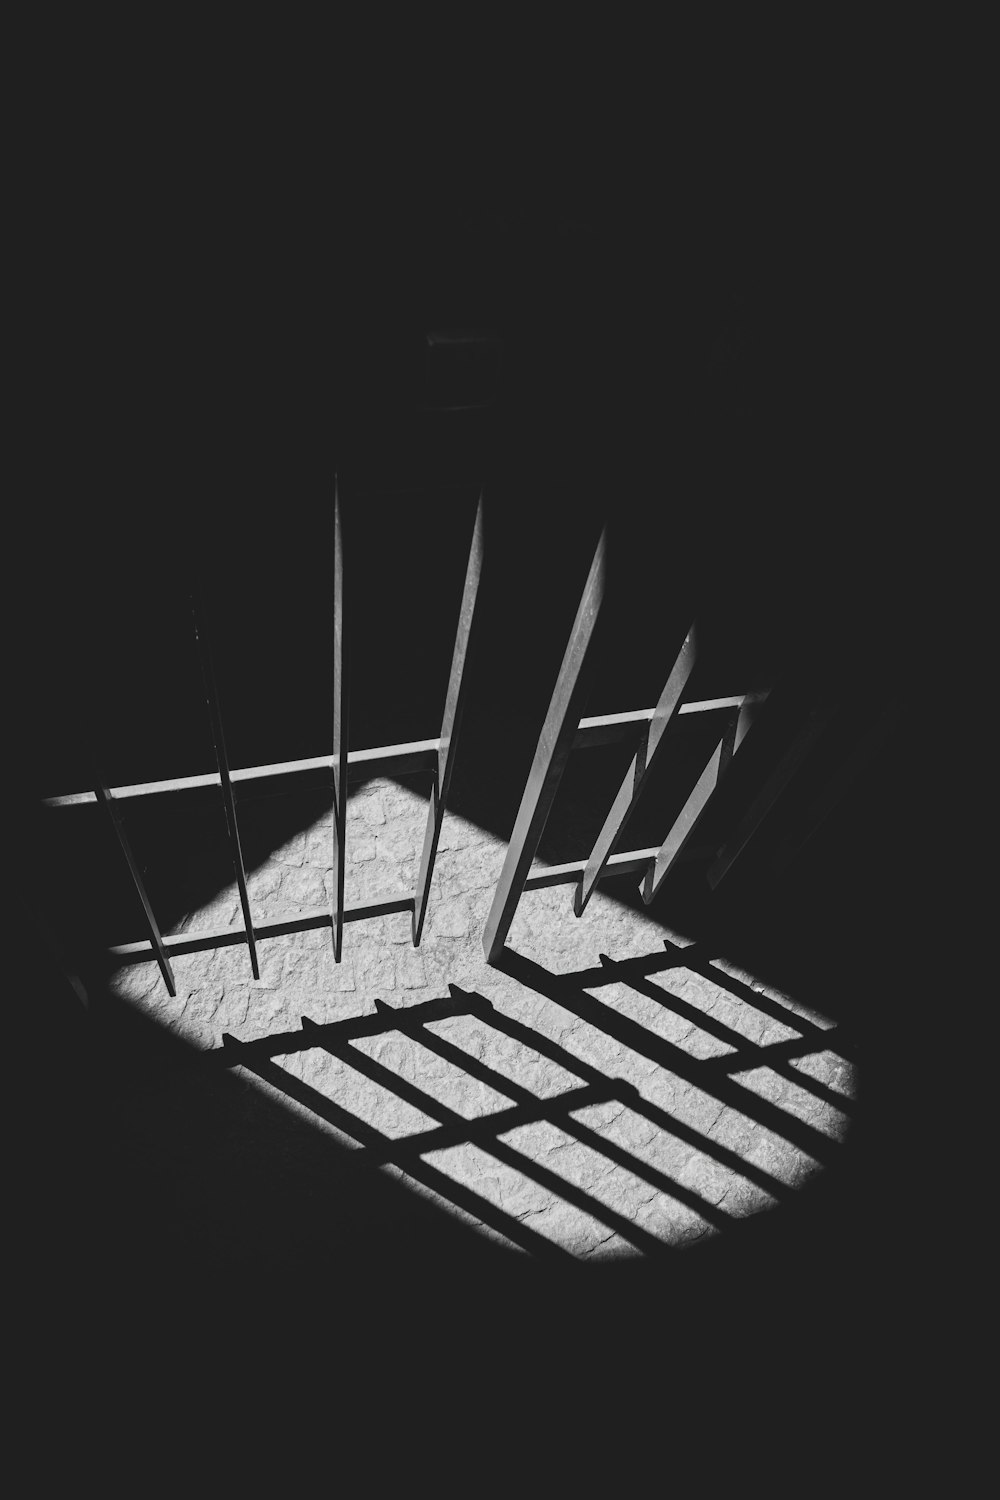 100+ Jail Pictures | Download Free Images & Stock Photos on Unsplash